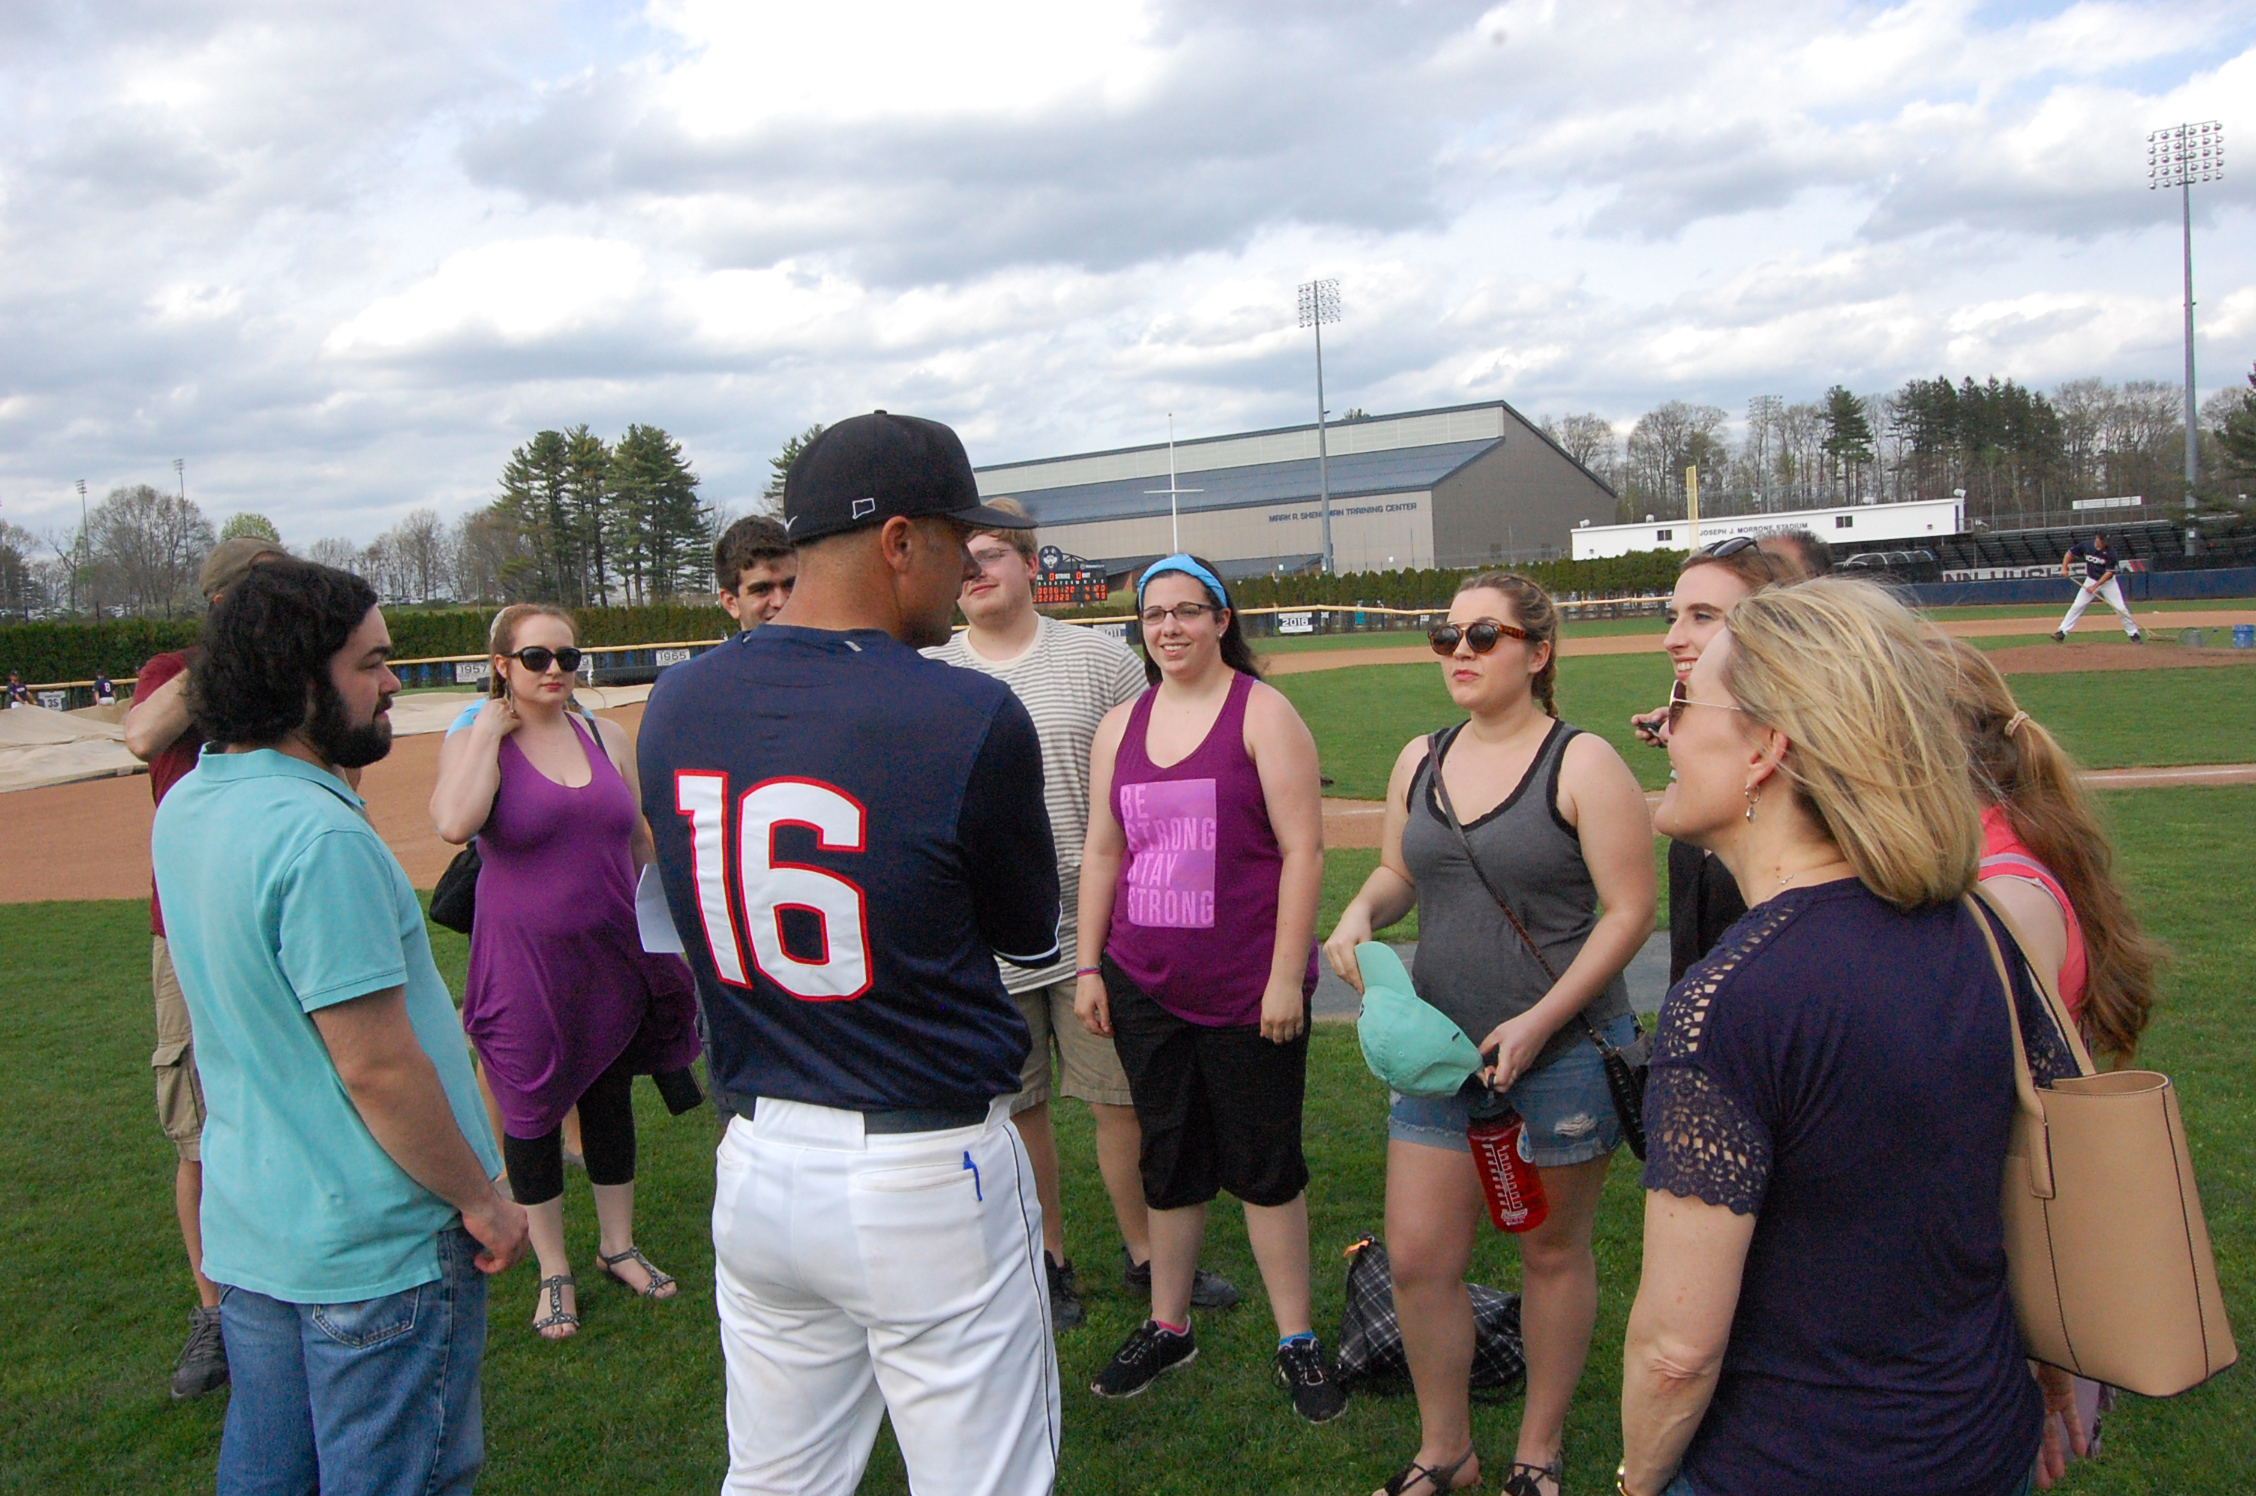 Head baseball coach Jim Penders ’94 (CLAS), ’98 MA, speaks with undergraduate and graduate music students who performed in “H.M.S. Pinafore” following the Huskies’ win over Cincinnati on April 30. (Kenneth Best/UConn Photo)